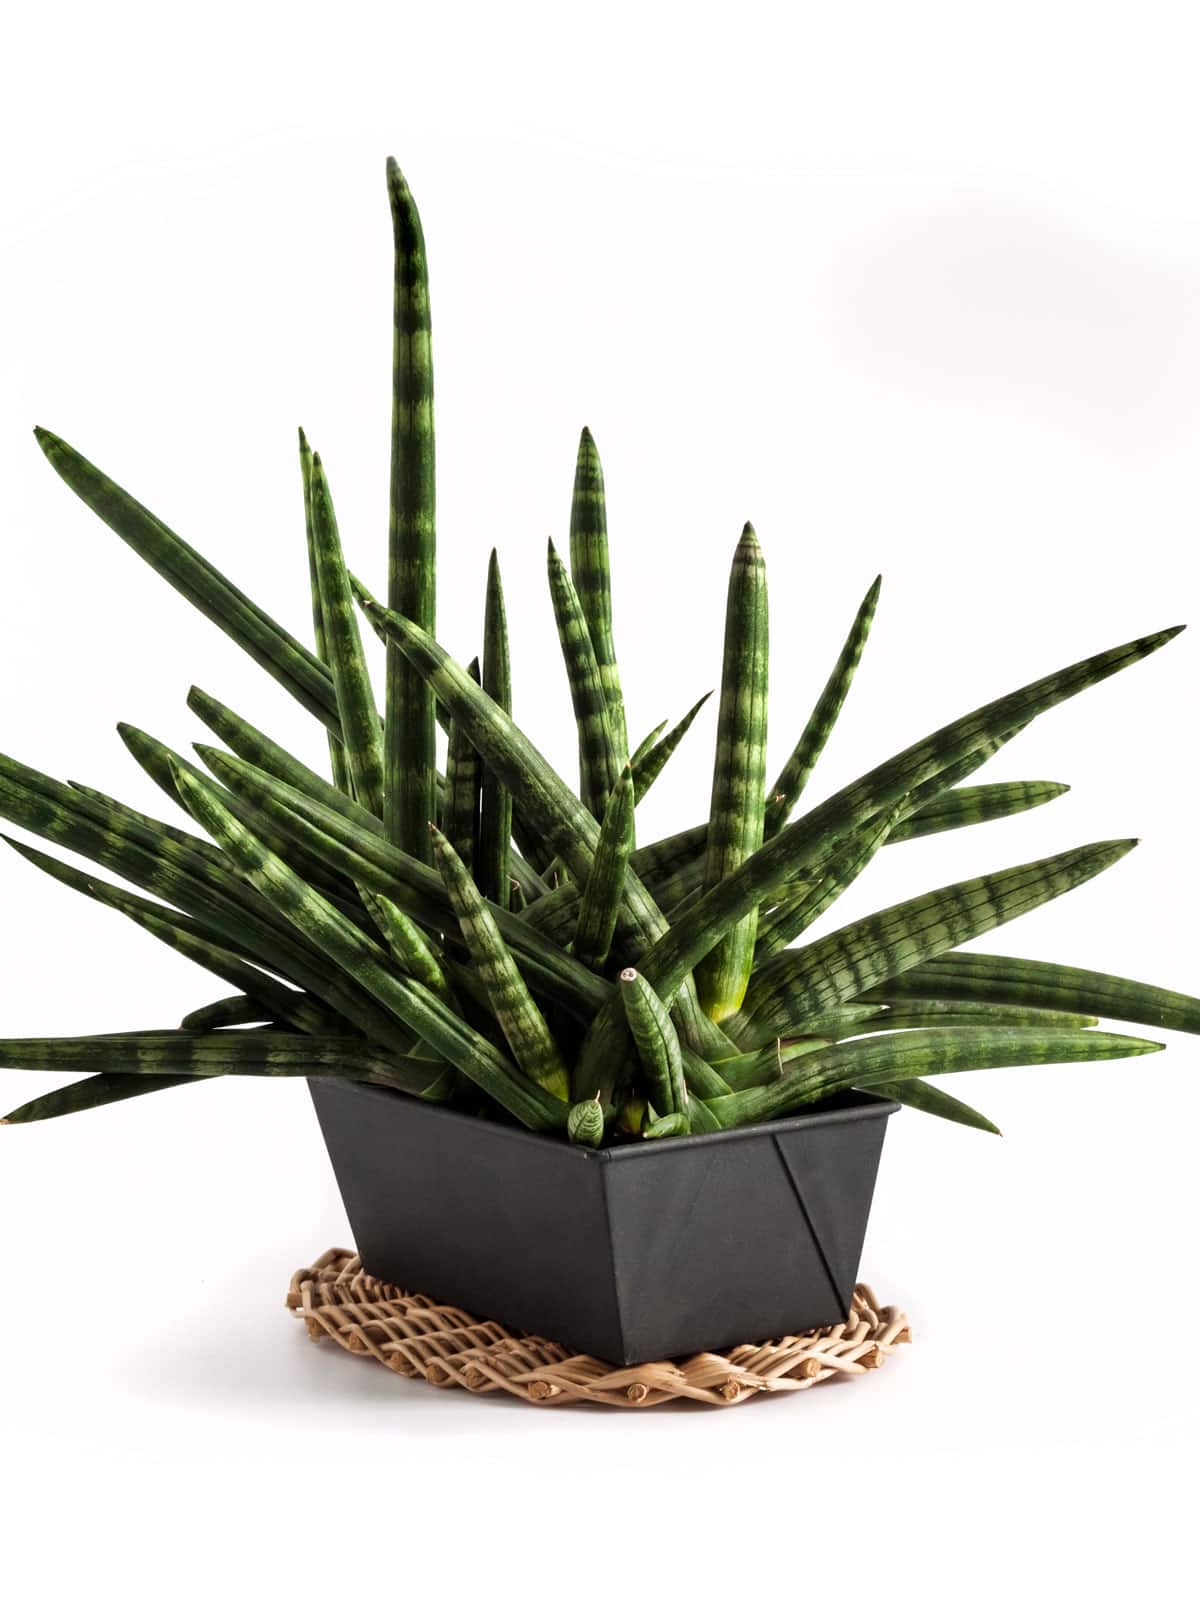 Long spikey leaves of a Sansevieria Cylindrica 'Boncel'